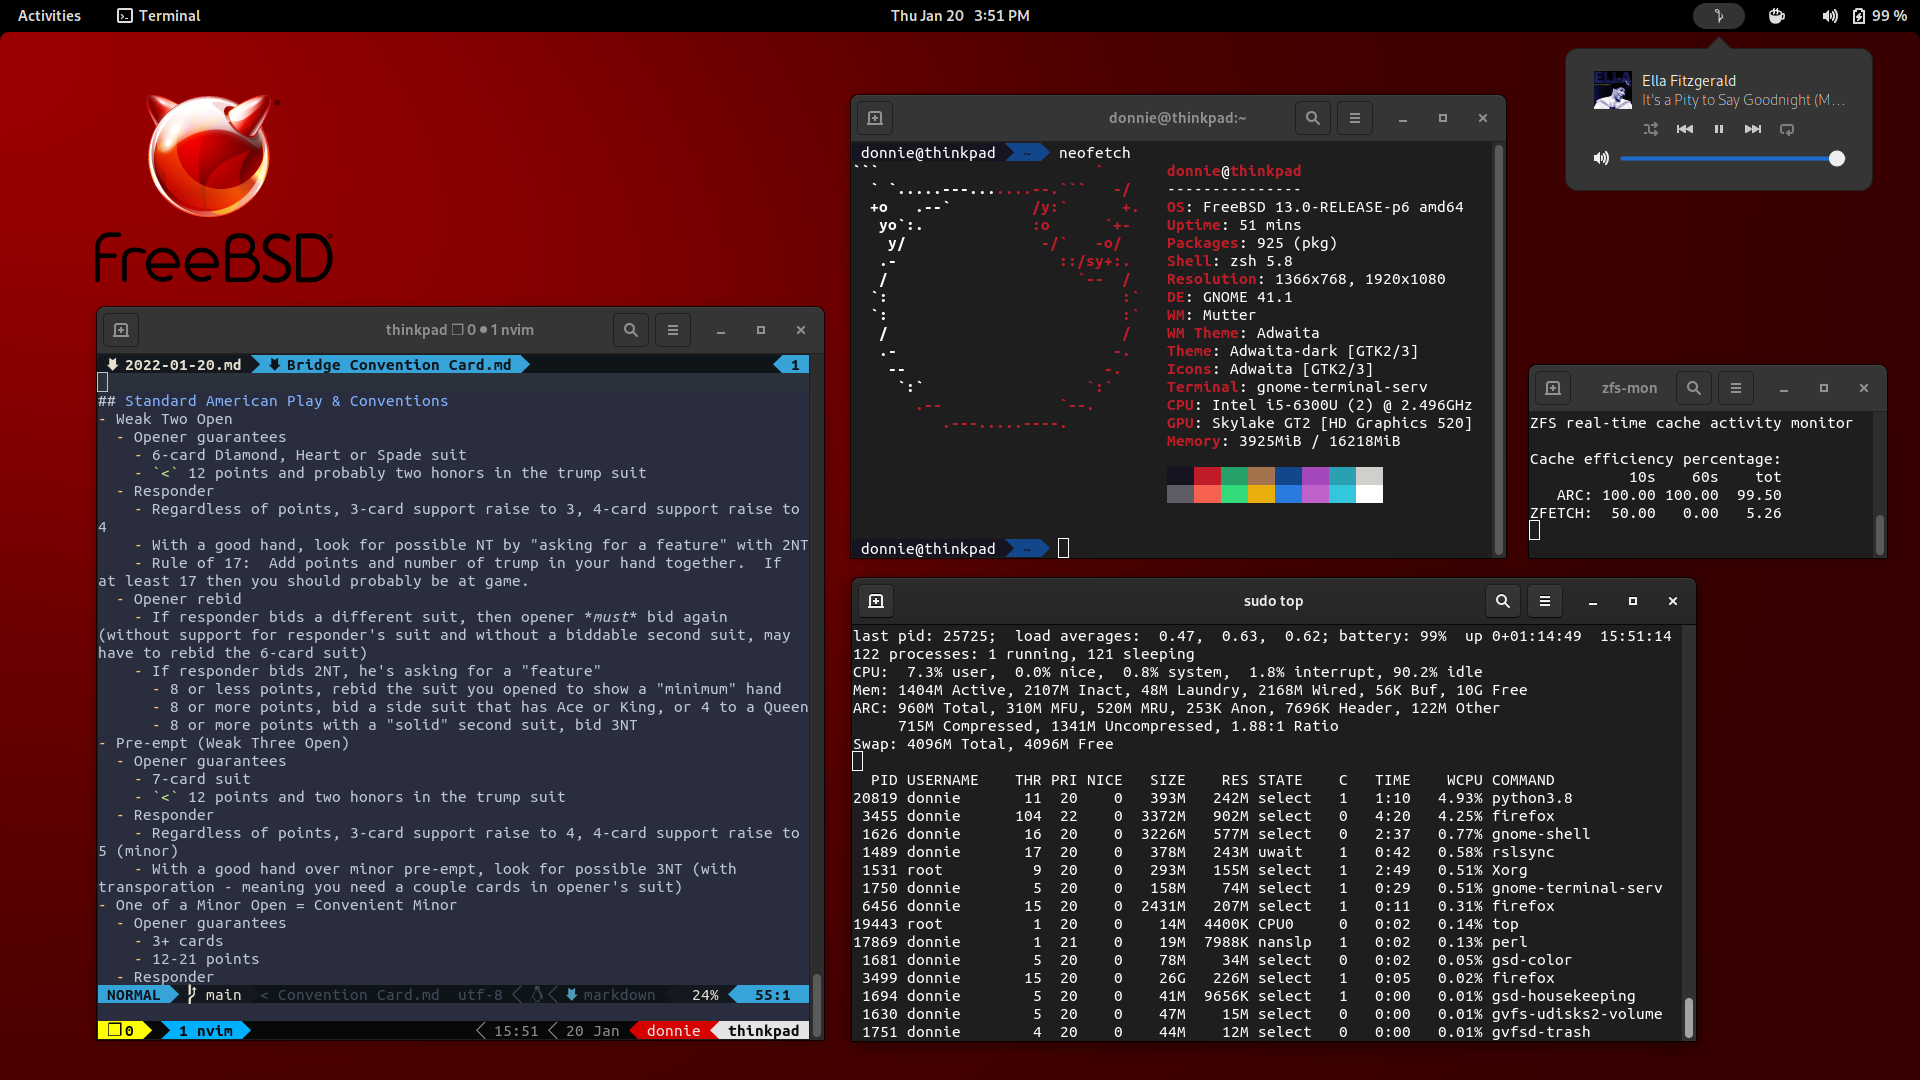 FreeBSD GNOME Project: Screenshots | The FreeBSD Project